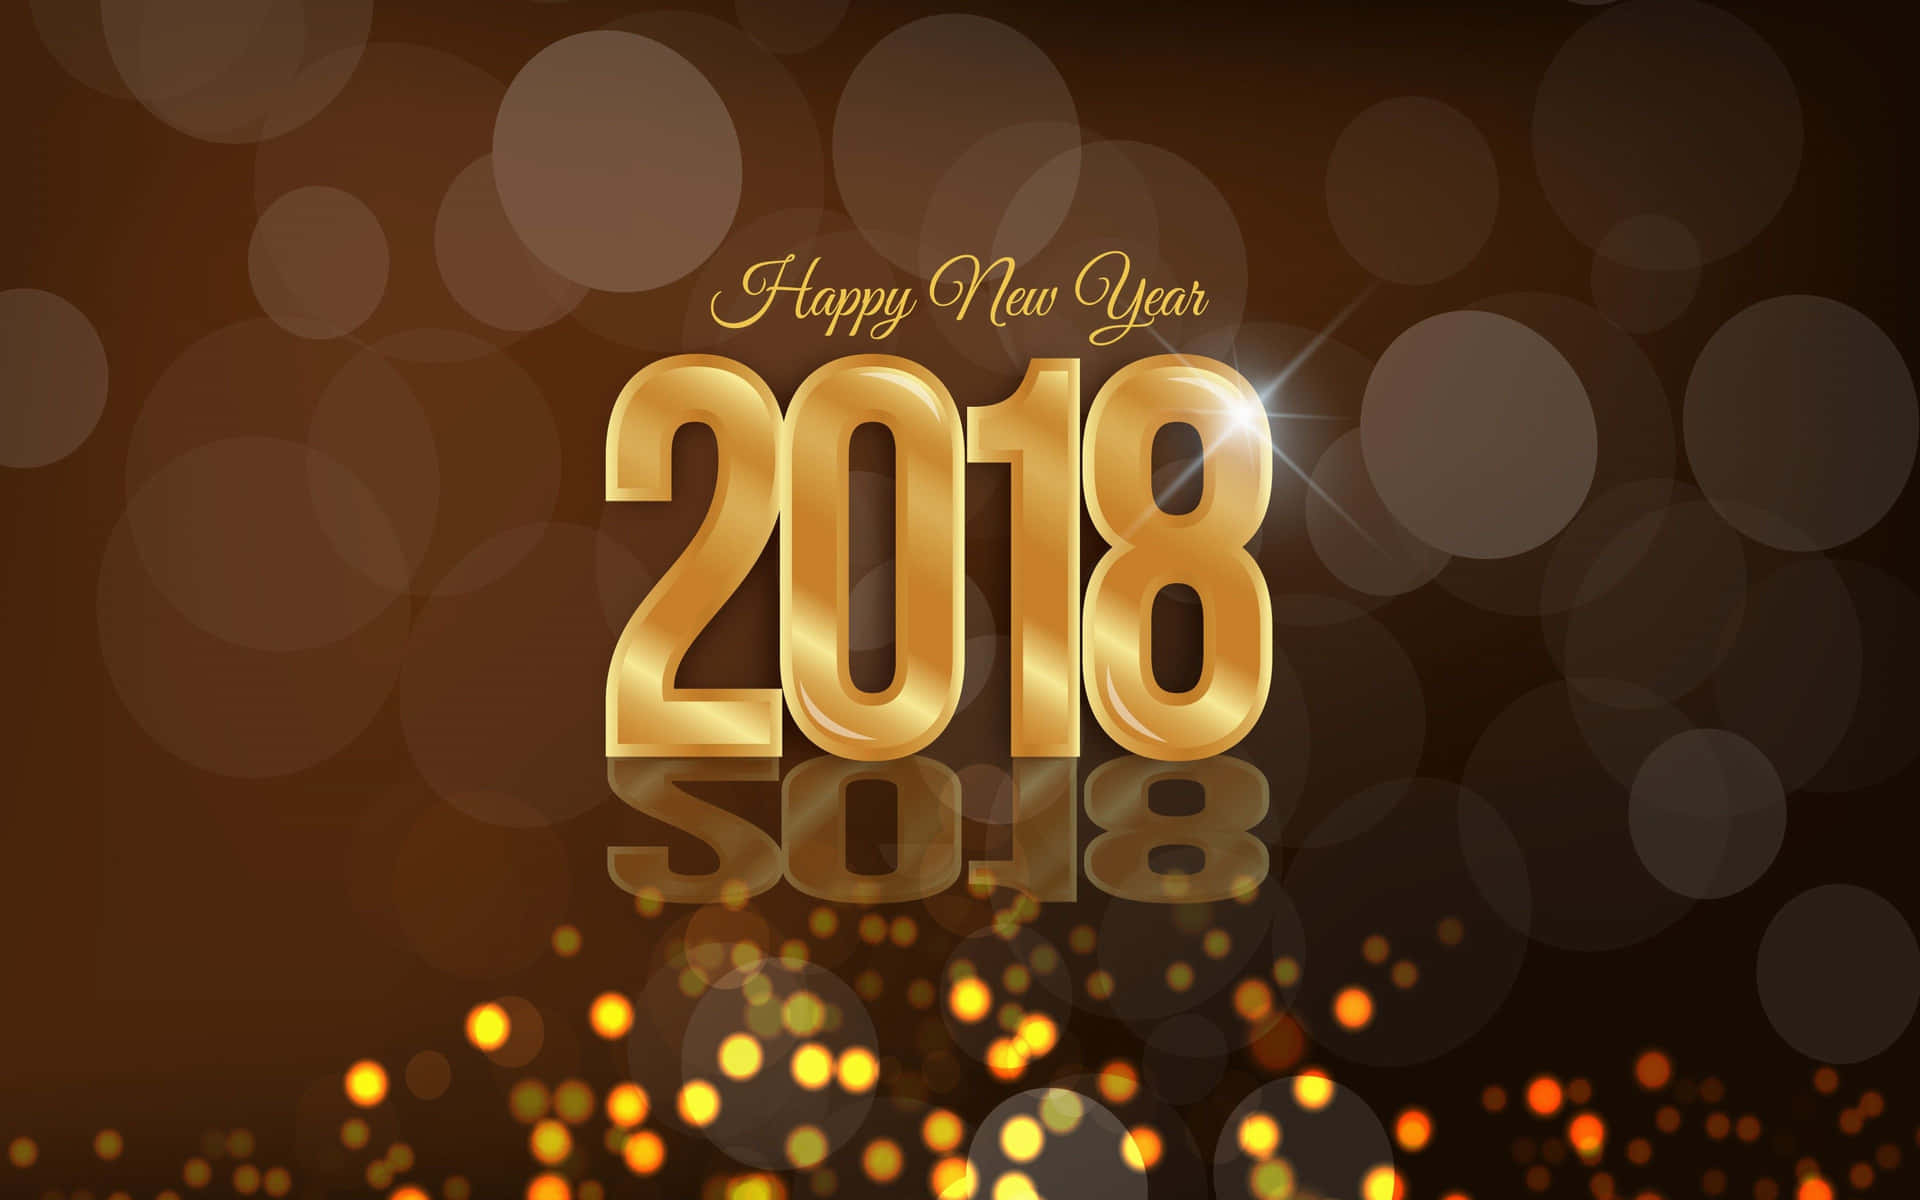 Happy New Year 2018 On A Dark Background With Gold Letters